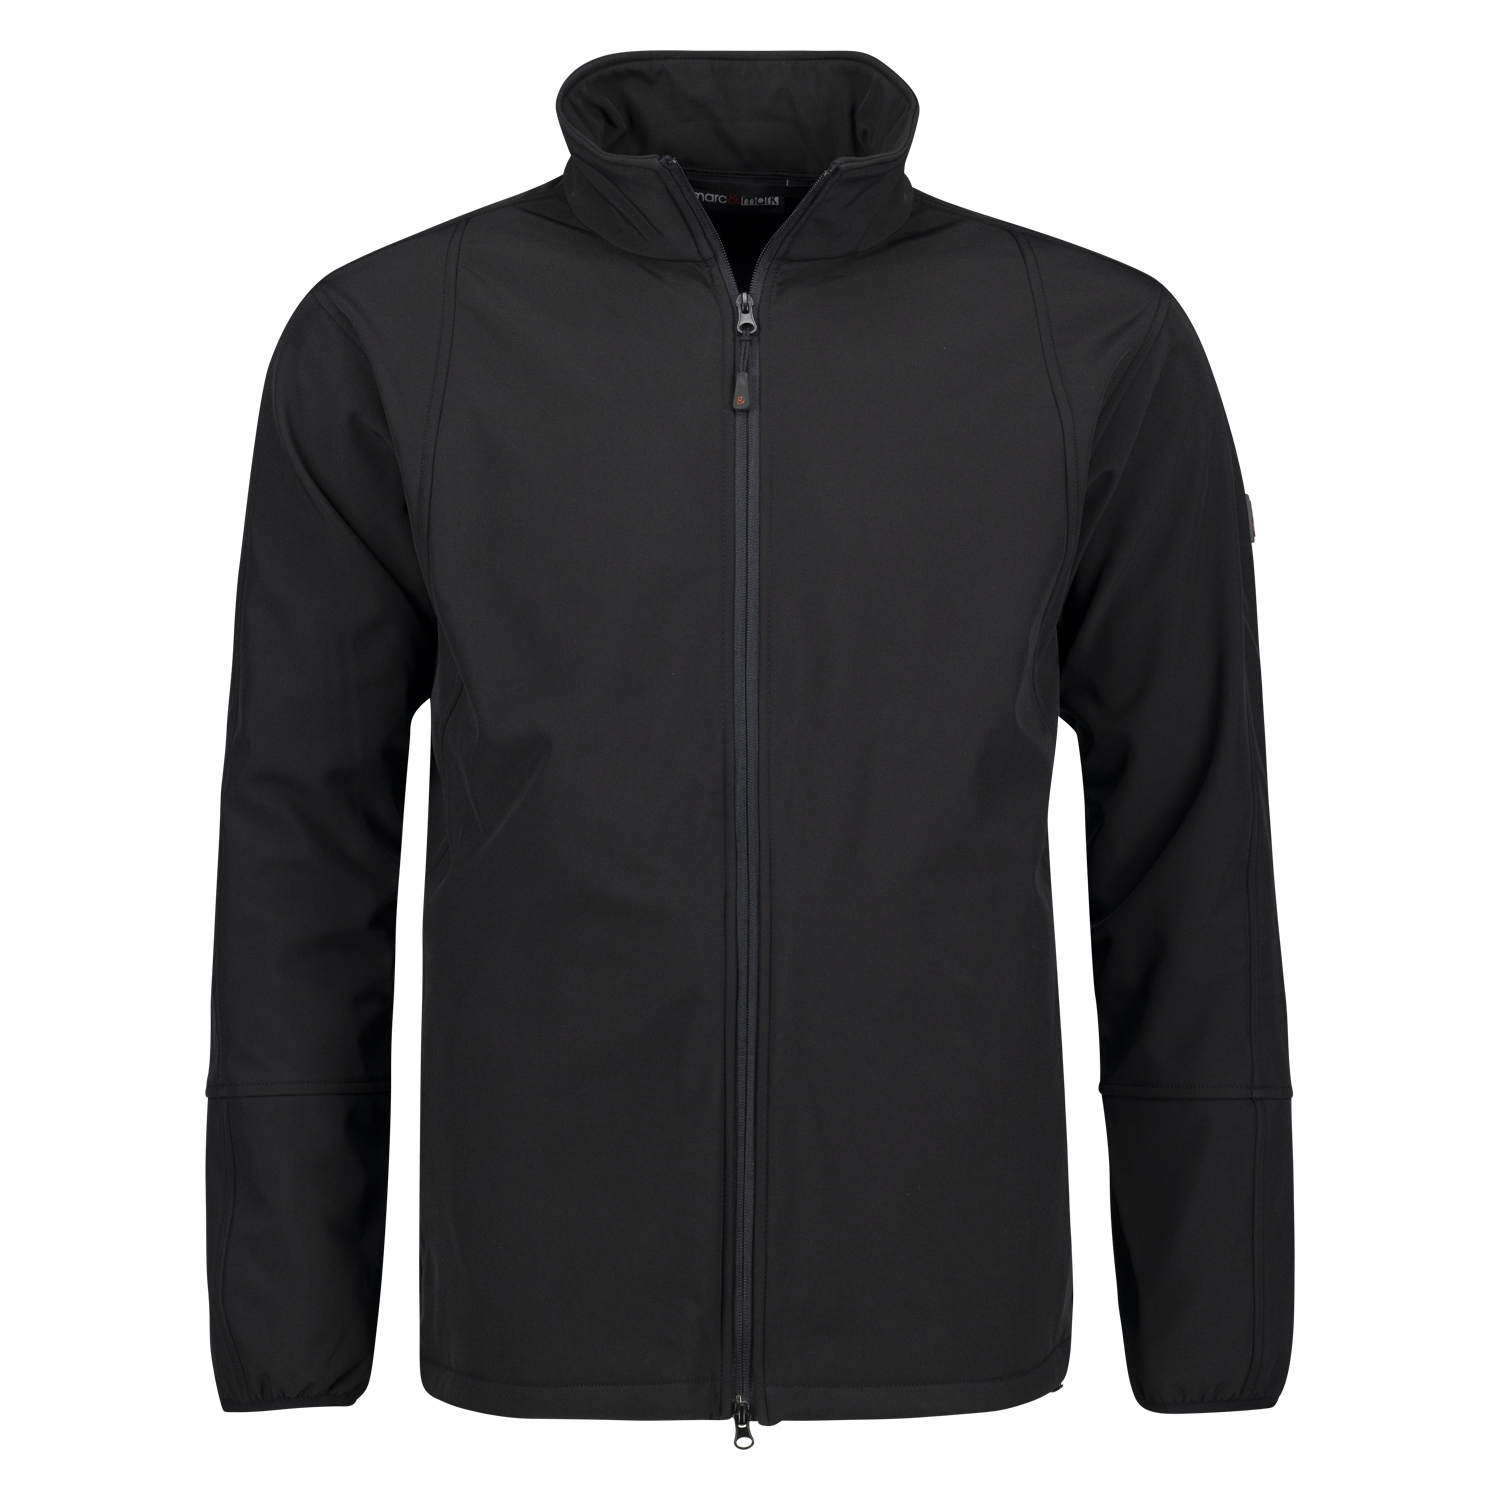 Softshell jacket in black by Marc&Mark in extra large sizes up to 10XL